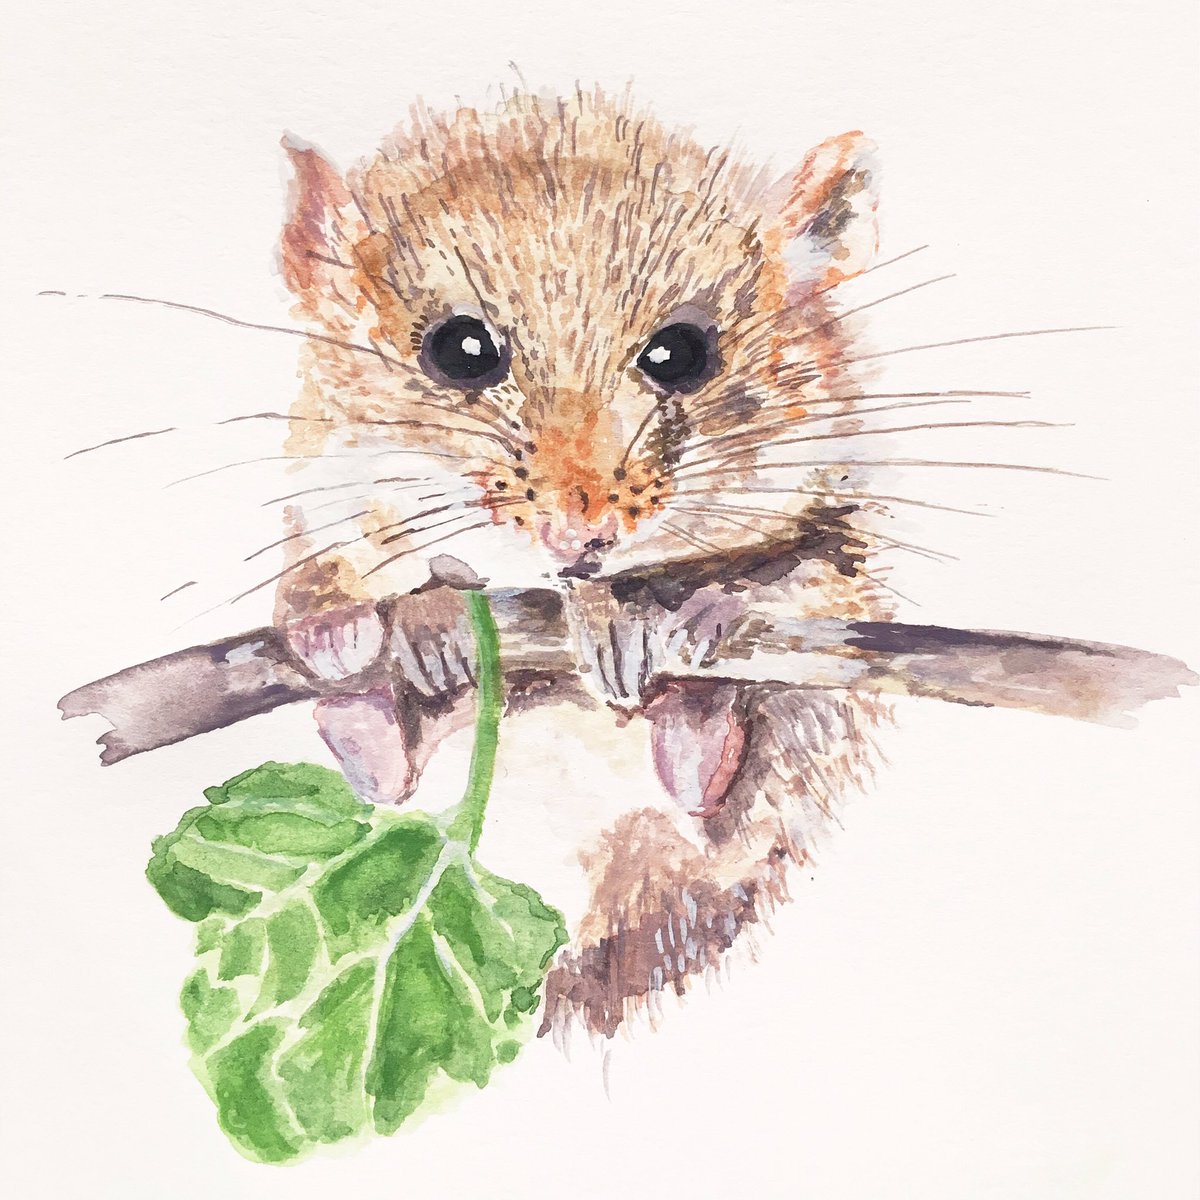 Louise Naughton on Twitter: &quot;A curious dormouse #illustration #watercolour #instagram https://t.co/MURaH5DtXP https://t.co/o1mUJmYWb7&quot; / Twitter